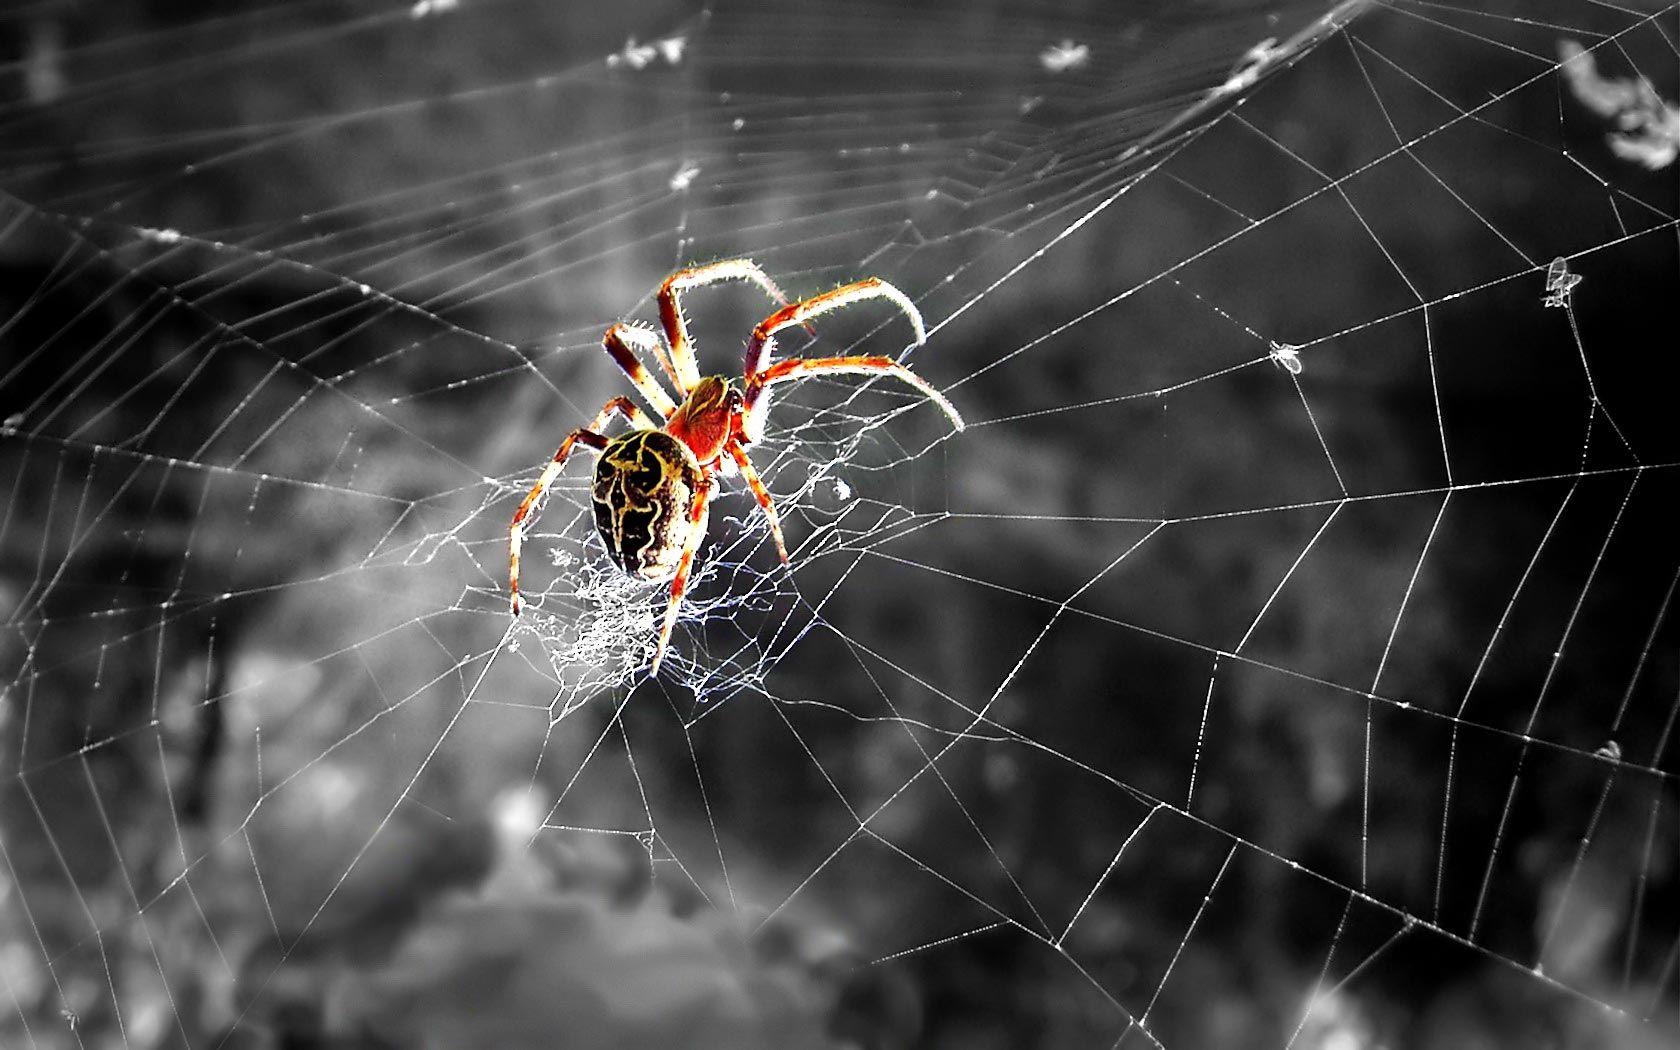 Spider Wallpaper High Quality Resolution. Spiders scary, Spider